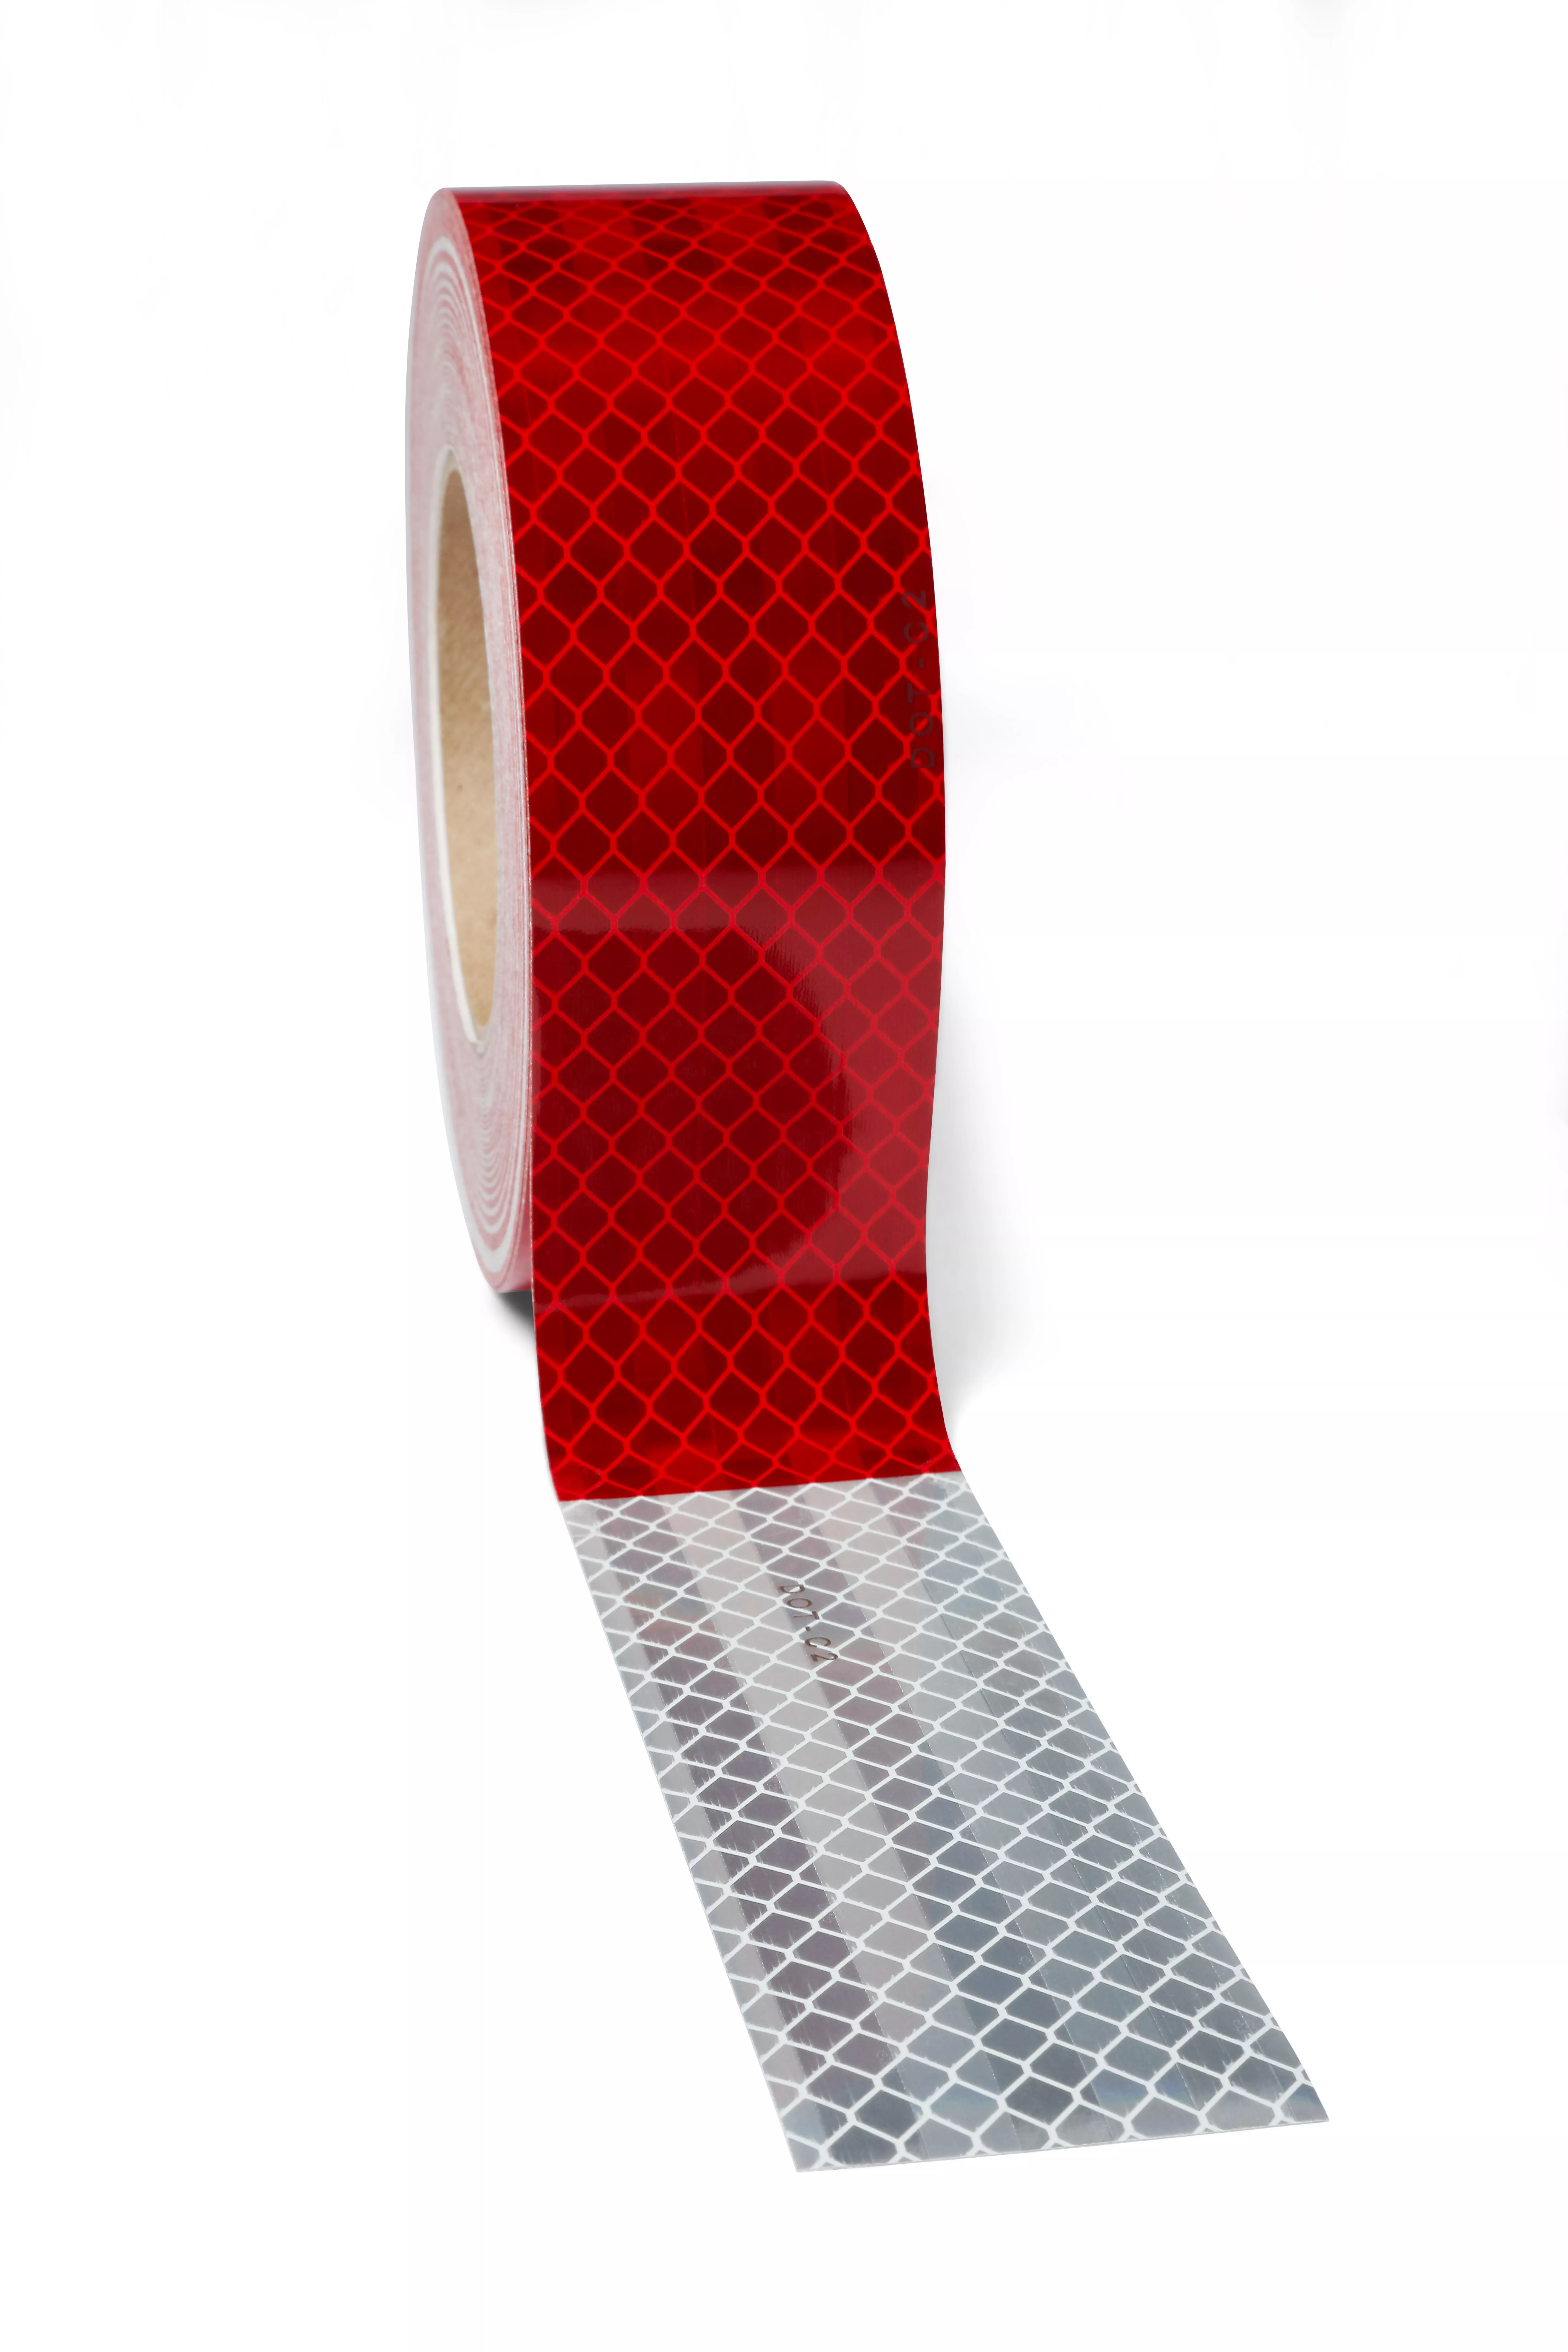 UPC 00638060190623 | 3M™ Flexible Prismatic Conspicuity Markings 913-326NL Red/White